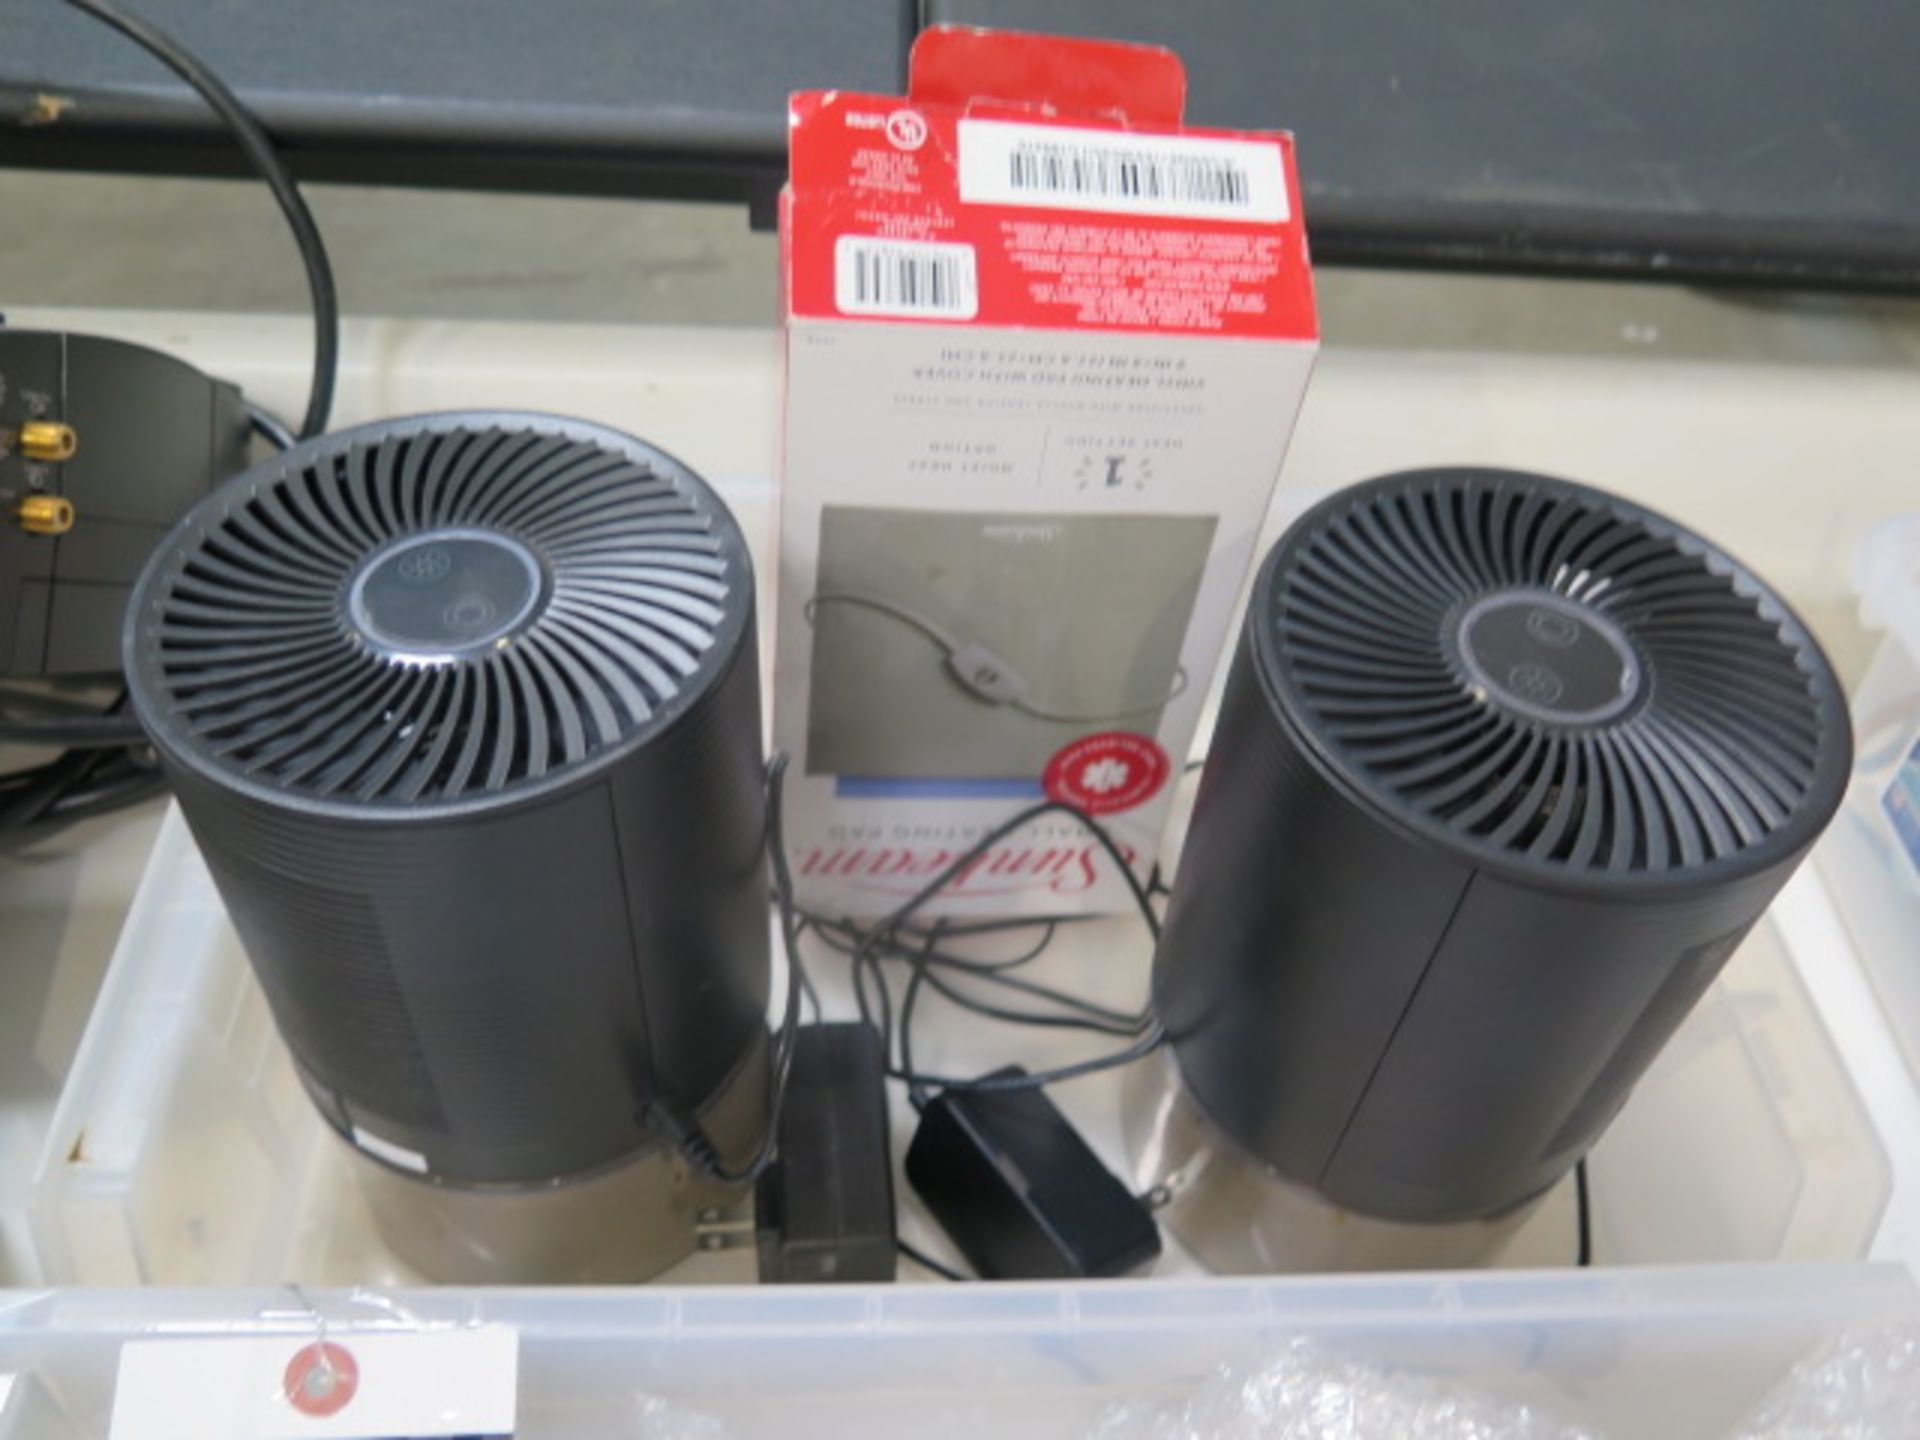 Lights and Air Purifiers (SOLD AS-IS - NO WARRANTY) - Image 2 of 4